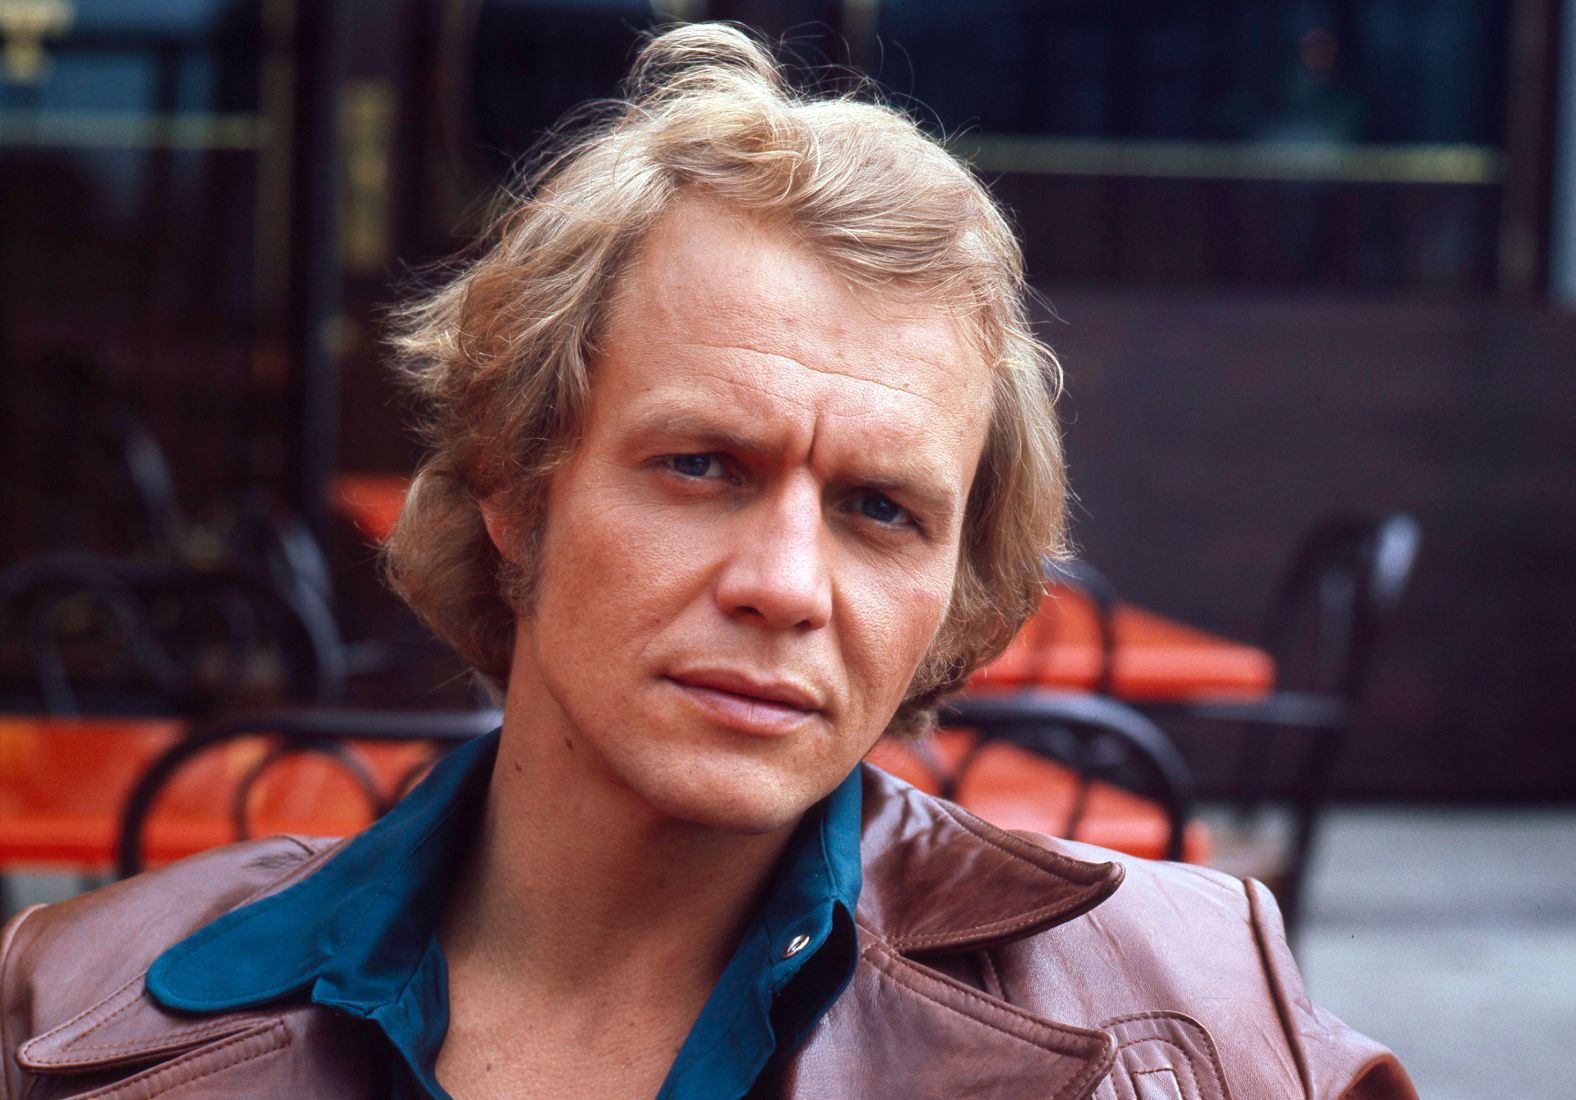 <a href="https://www.cnn.com/2024/01/05/entertainment/david-soul-death/index.html" target="_blank">David Soul</a>, best known for his role in the popular 1970s television series "Starsky & Hutch" died on January 4, his wife announced in a statement to CNN. He was 80.